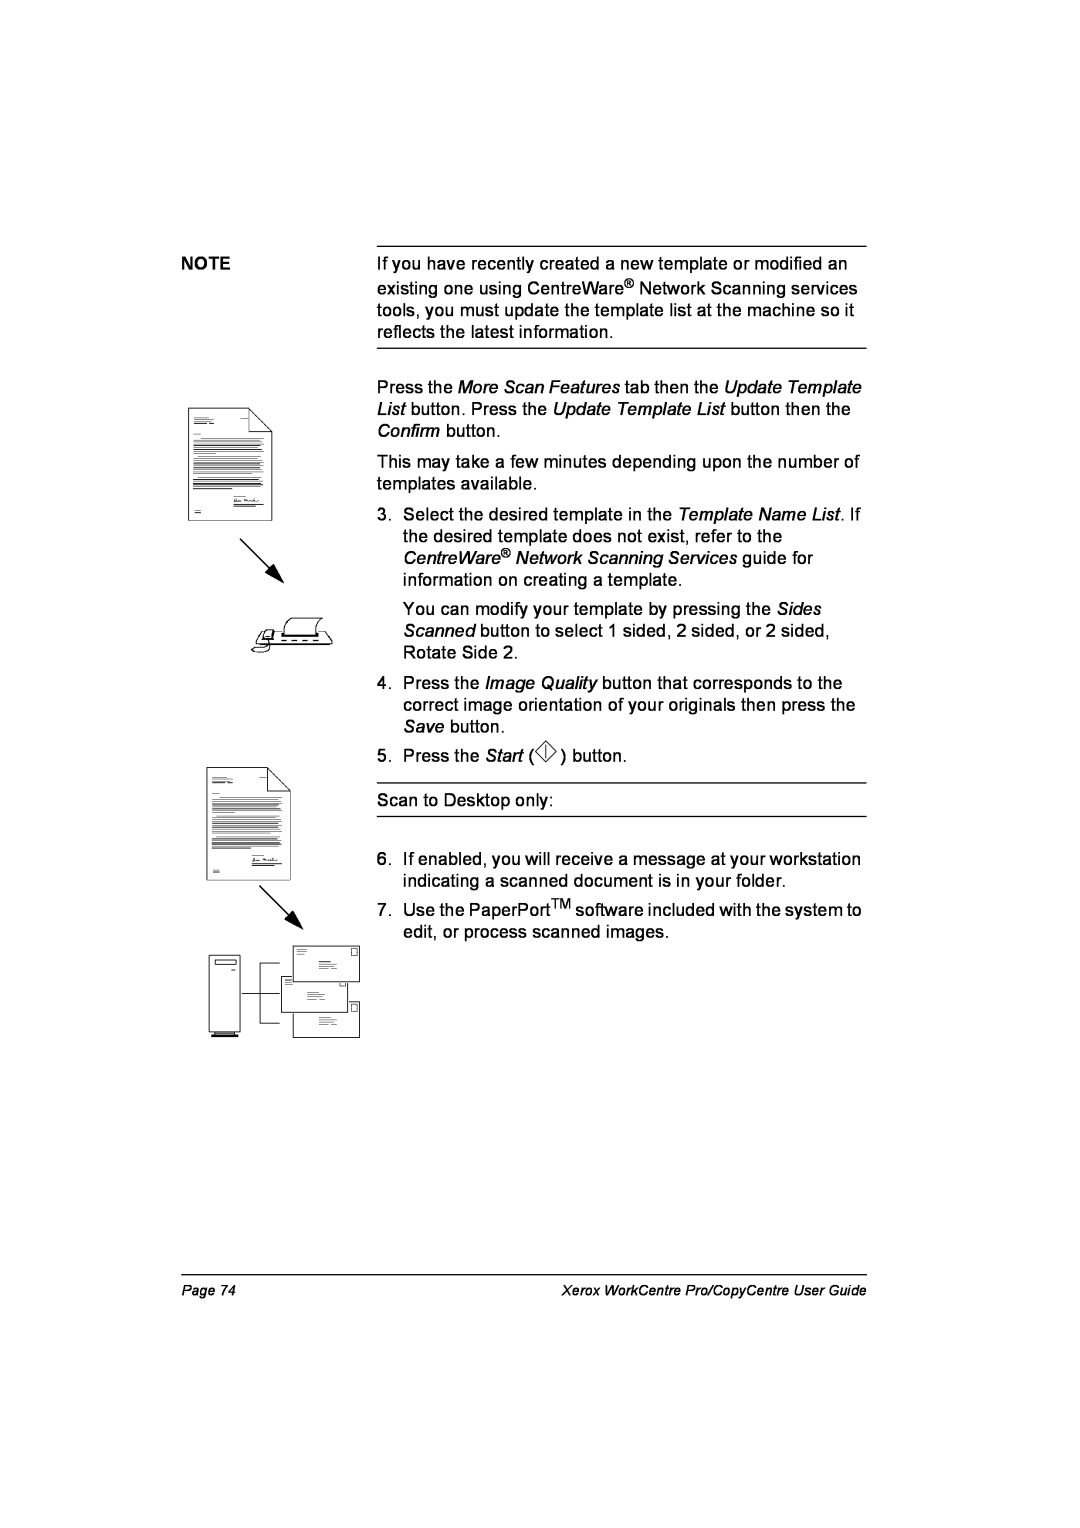 Xerox C65, C90, C75 manual reflects the latest information, Confirm button, CentreWare Network Scanning Services guide for 